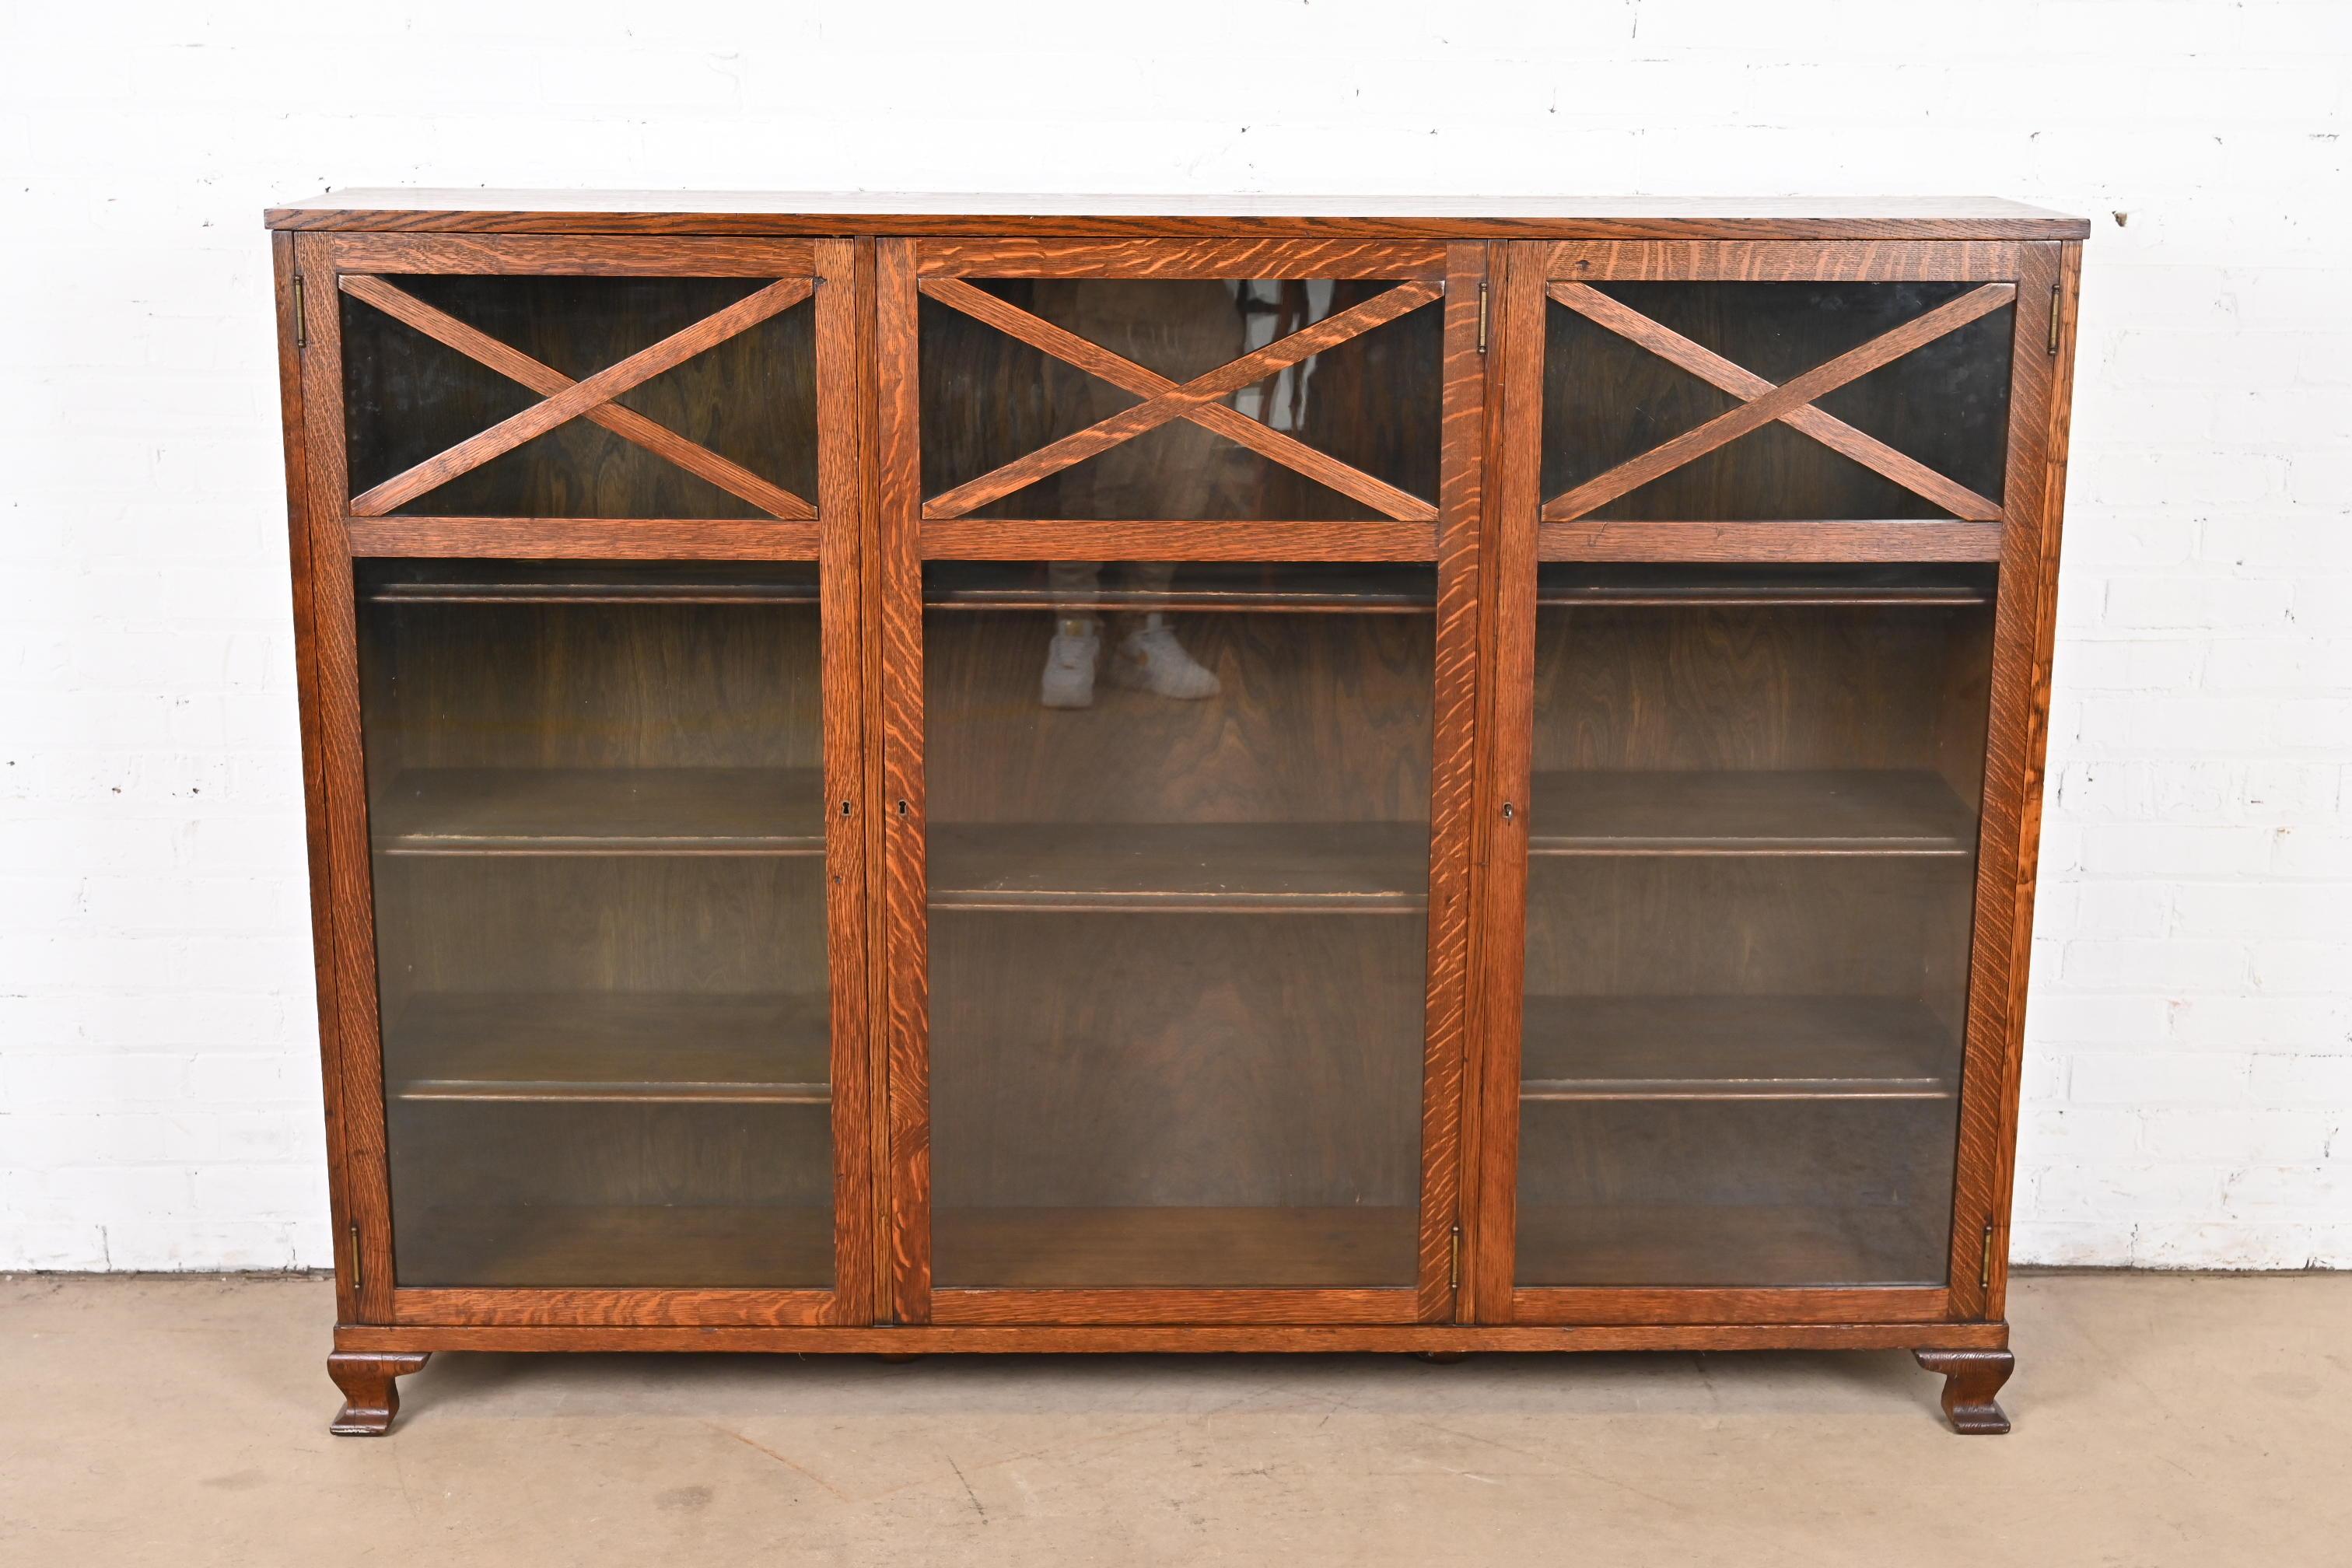 A beautiful antique Arts & Crafts triple bookcase cabinet

In the manner of Stickley Brothers

USA, Circa 1900

Gorgeous quarter sawn oak, with glass front doors. Cabinet locks, and original key is included.

Measures: 67